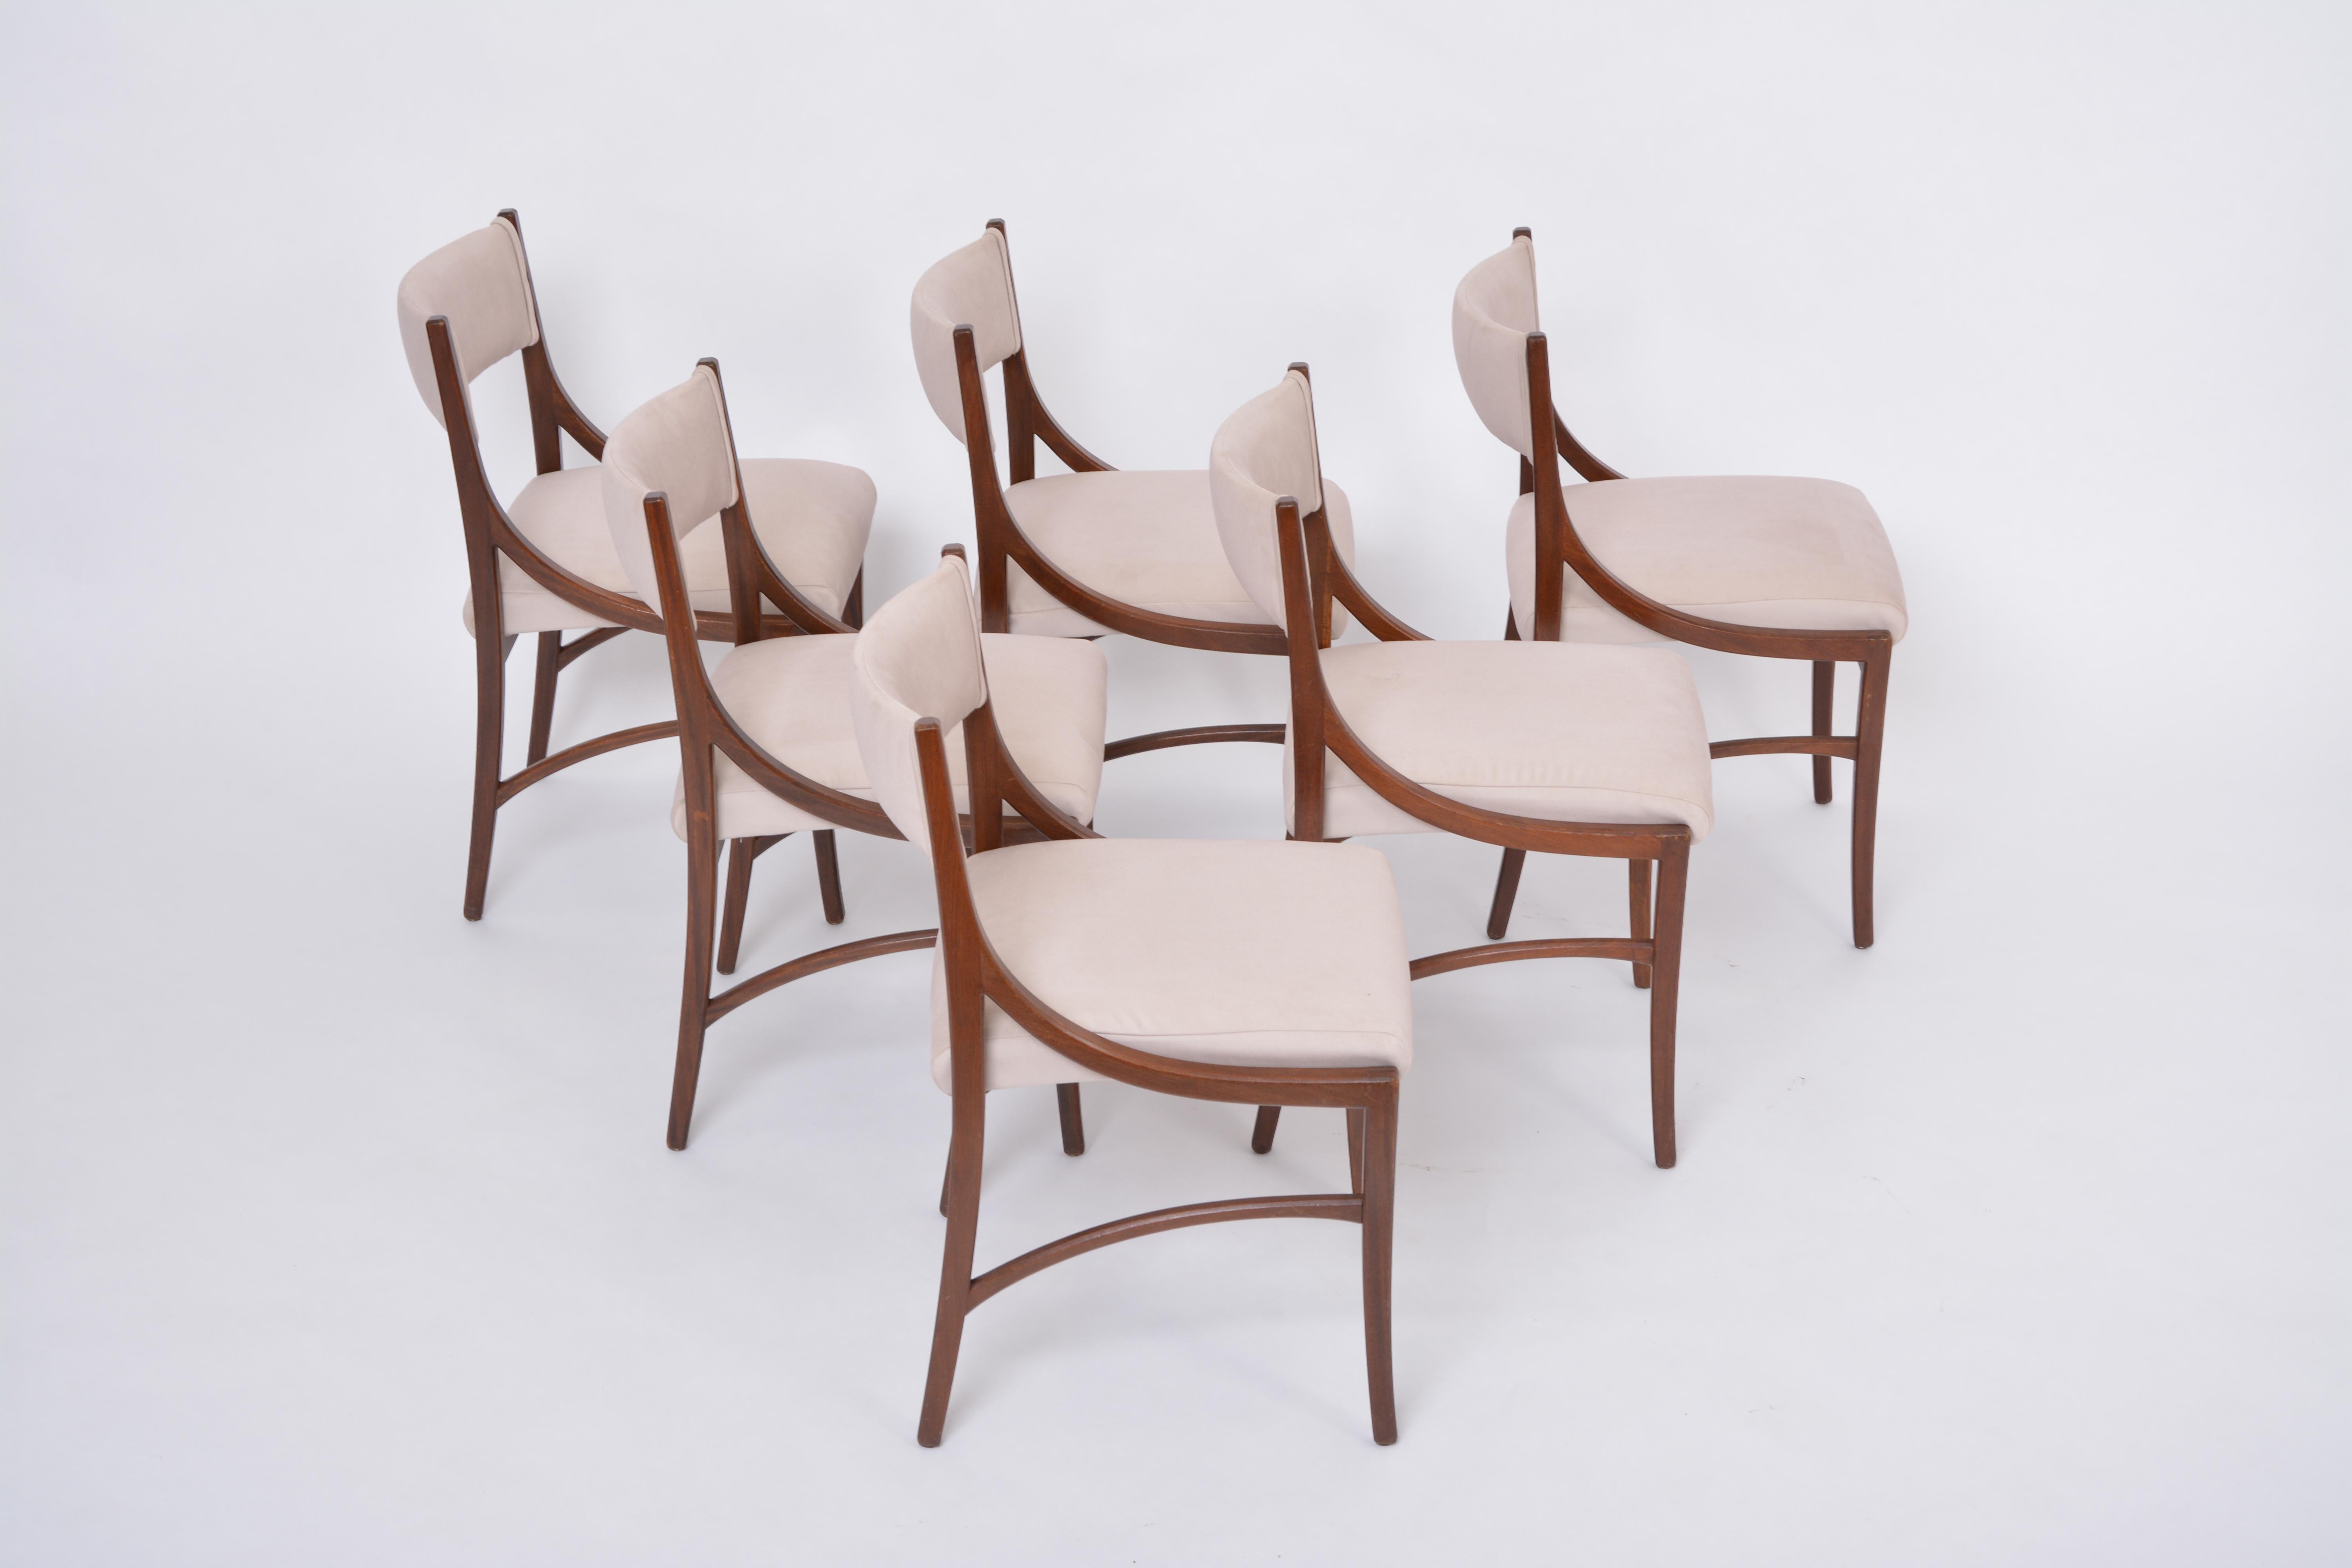 20th Century Set of six Mid-Century Modern Beige Dining Chairs by Ico Parisi for Cassina